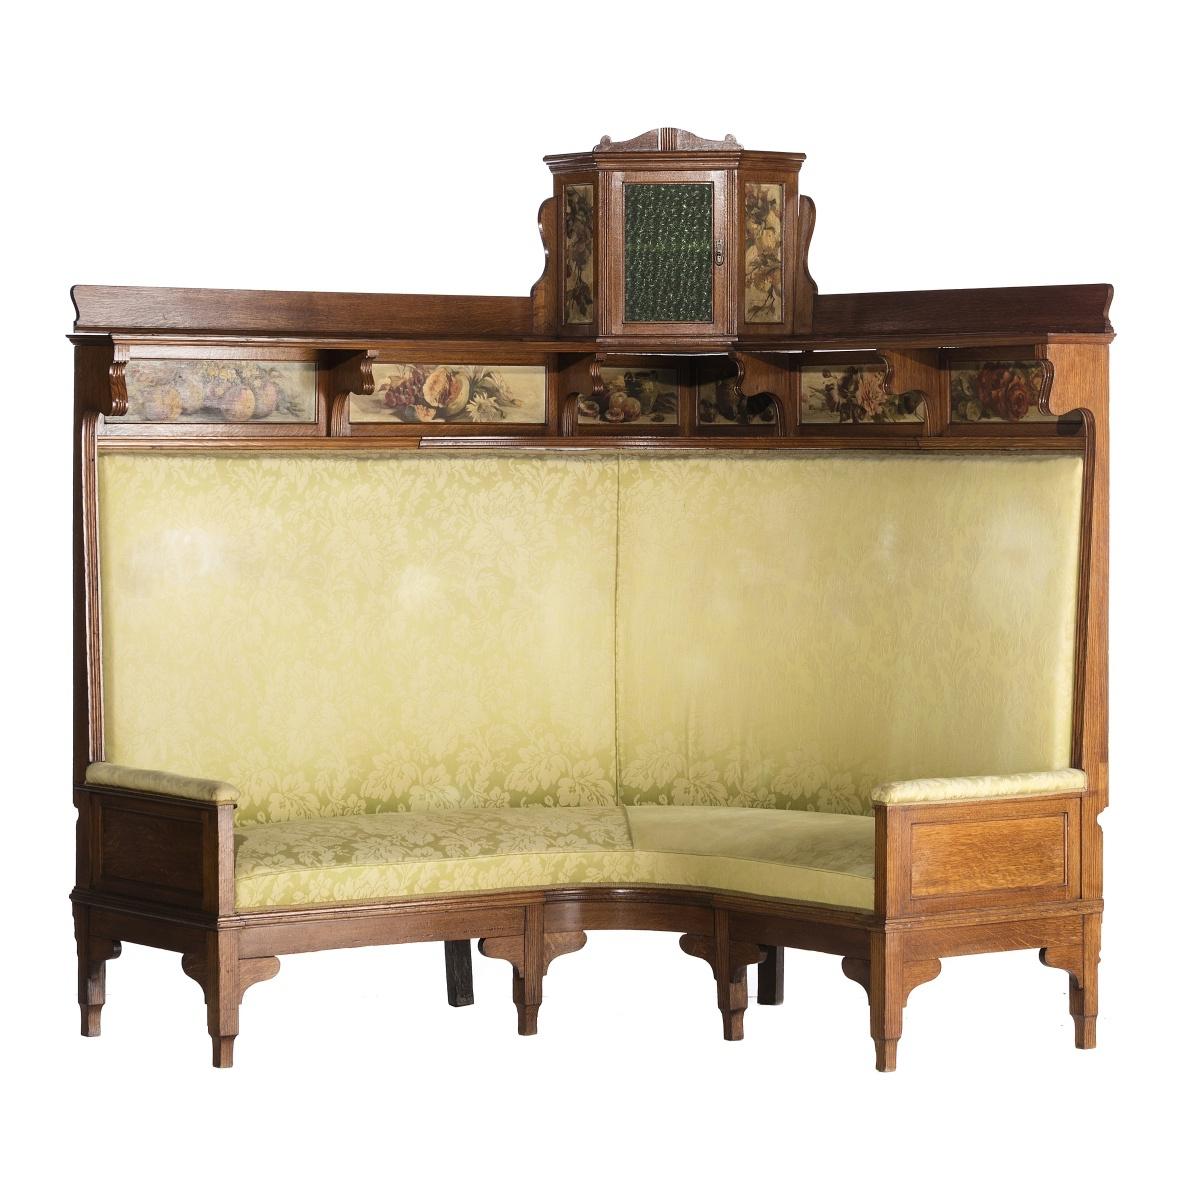 French Canape Art Nouveau, 19/20th century
in oak wood. 
Upholstered seat and back. 
Decorated with still life painted on wood. 
Signs of use. 
DIM.: 196 x 233 x 63 cm.
Good condition.


   